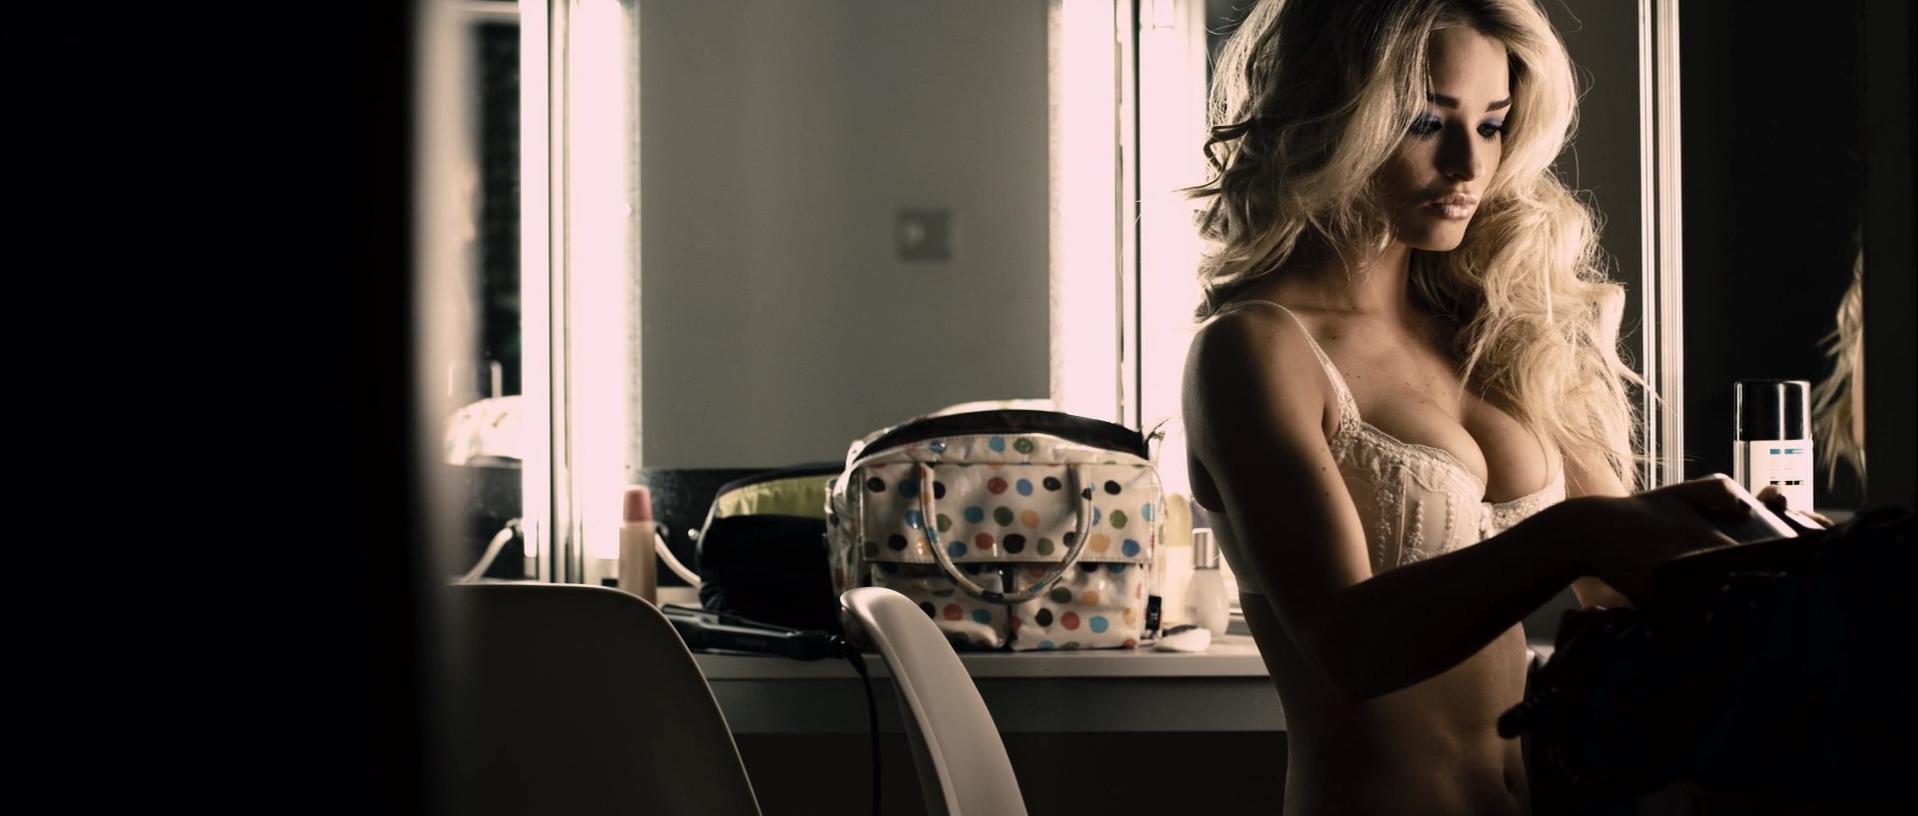 Emma Rigby sexy, Jennie Jacques nude - Demons Never Die (2011)